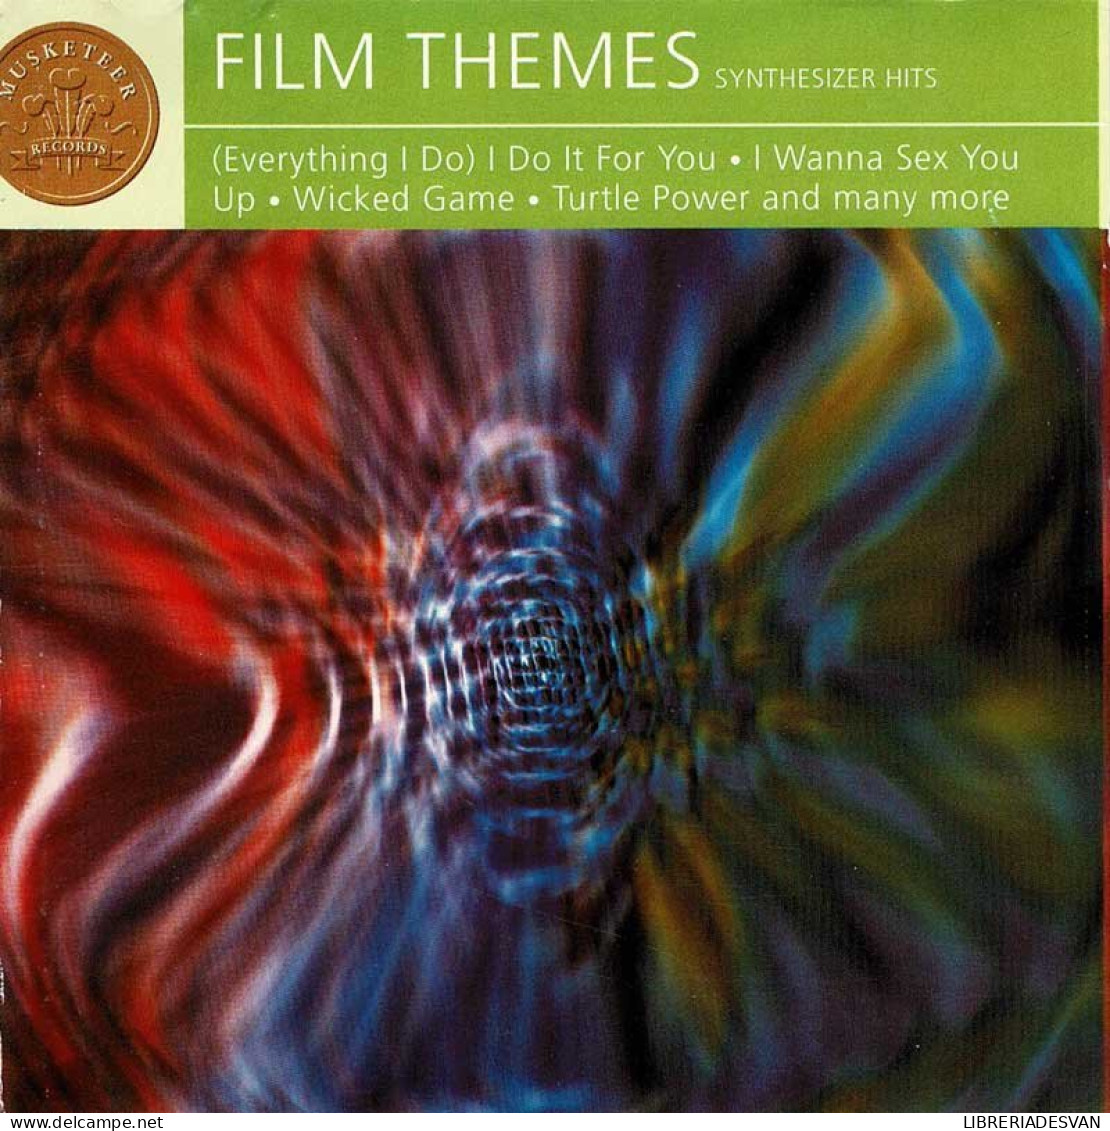 The London Studio Orchestra, The Hollywood Studio Orchestra - Film Themes Synthesizer Hits. CD - Filmmuziek